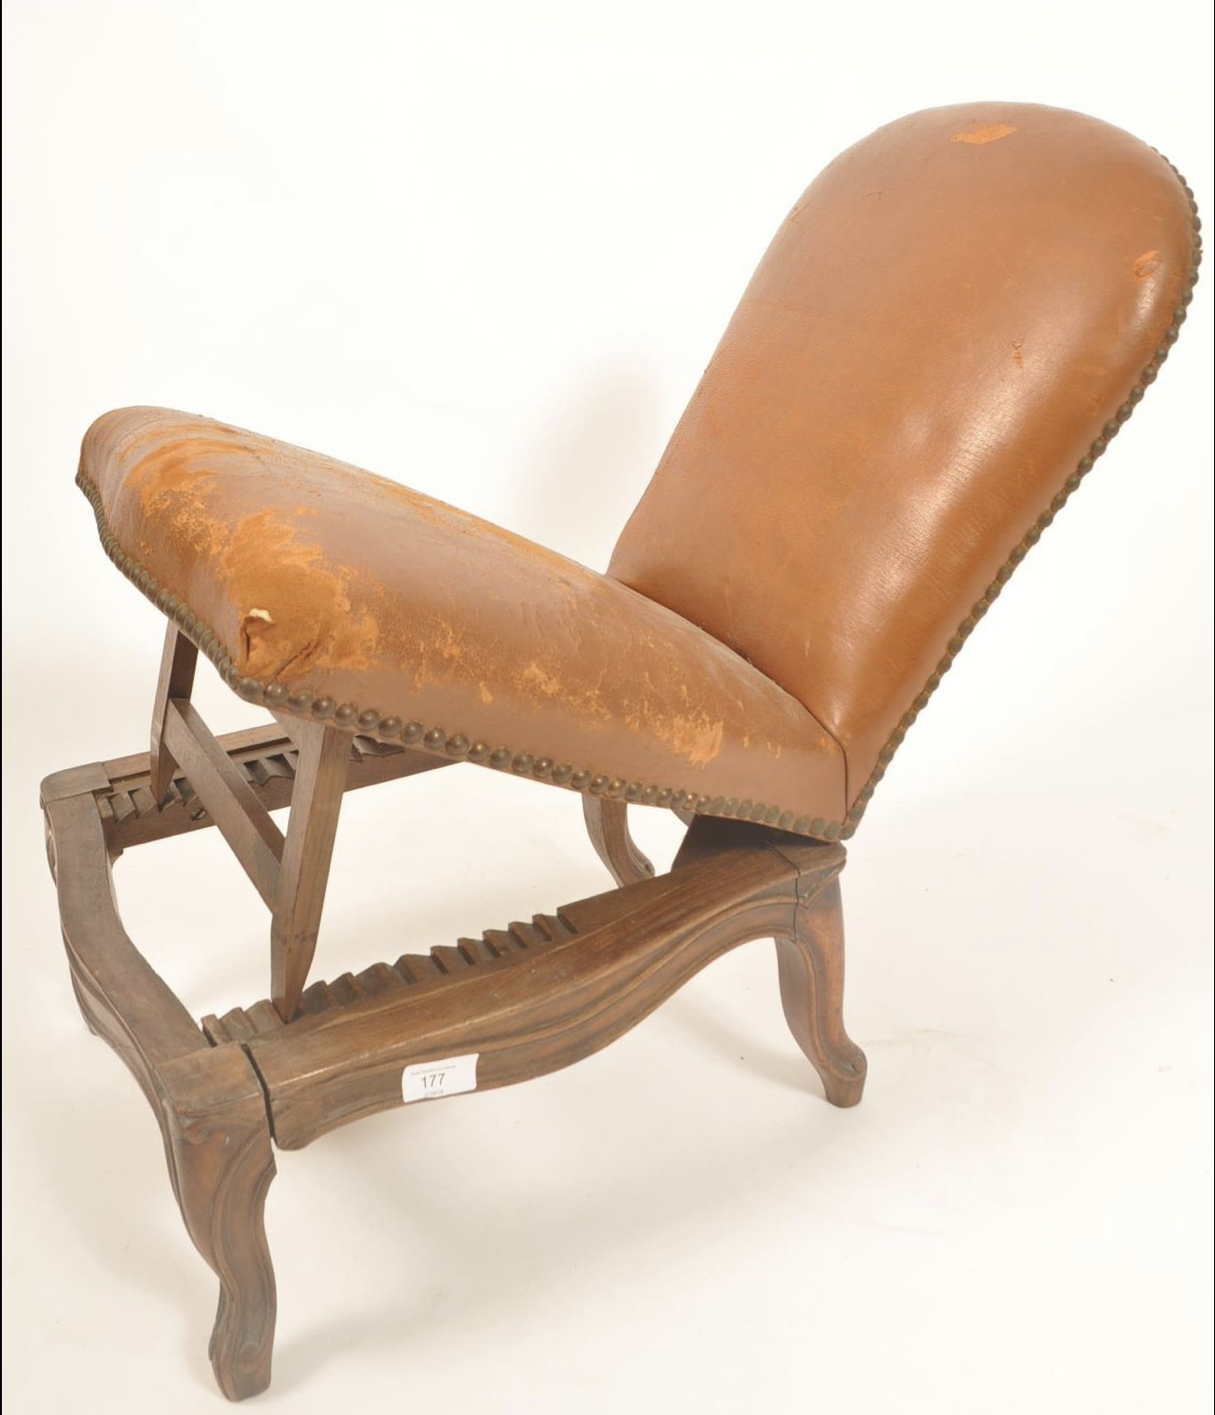 A 19th century oak and leather gout stool in the form of a French fauteuil.